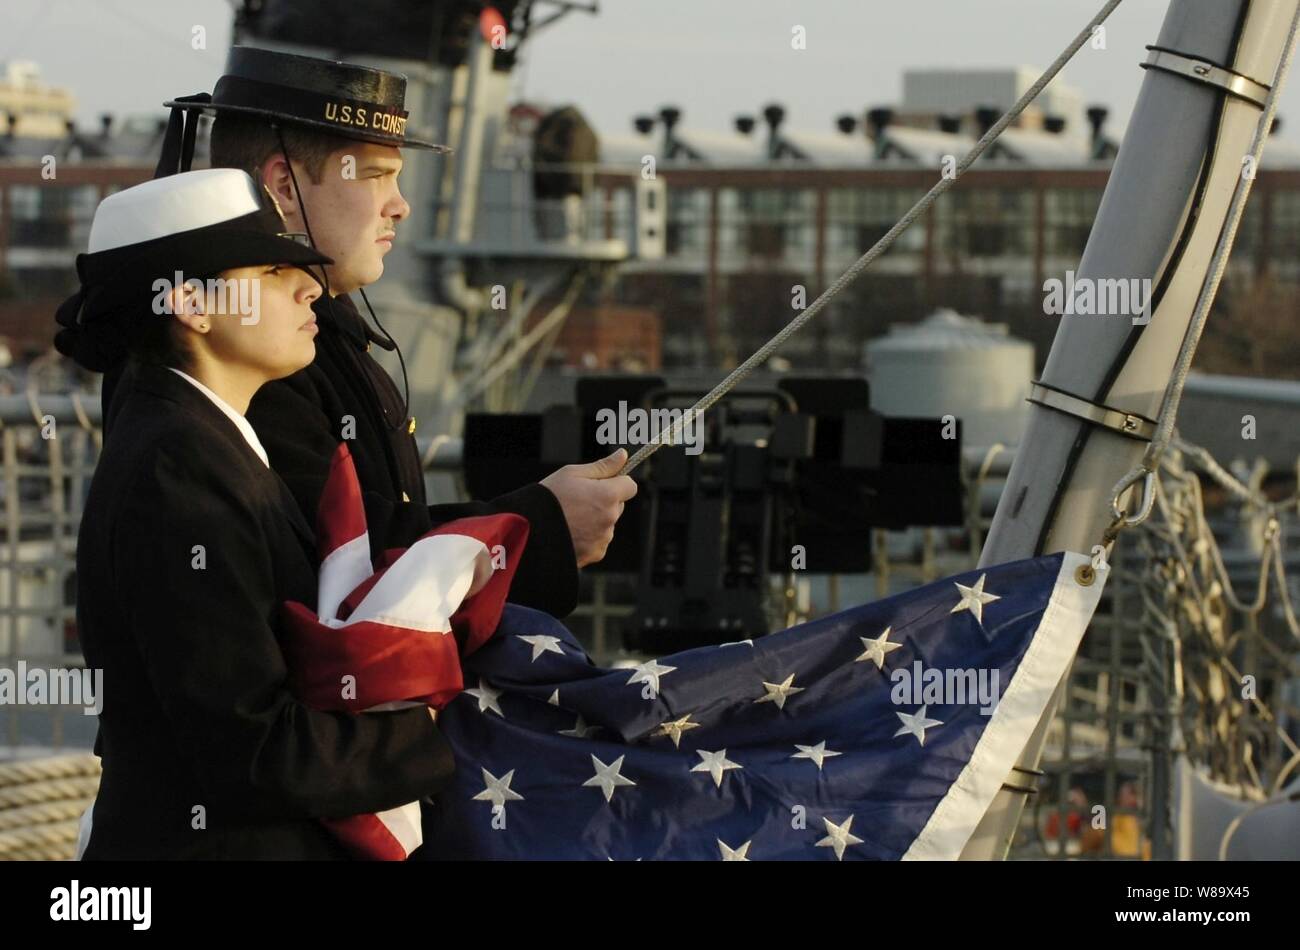 U.S. Navy Chief Quartermaster Stephanie Kotatis (left) and Boatswainís Mate Seaman Dustin Foster, a sailor assigned to the USS Constitution, stand by to commence raising the colors aboard the littoral combat ship USS Freedom (LCS 1) at Boston, Mass., on Dec. 6, 2008.  The Freedom is the first of two littoral combat ships designed to operate in shallow water environments to counter threats in coastal regions. Stock Photo